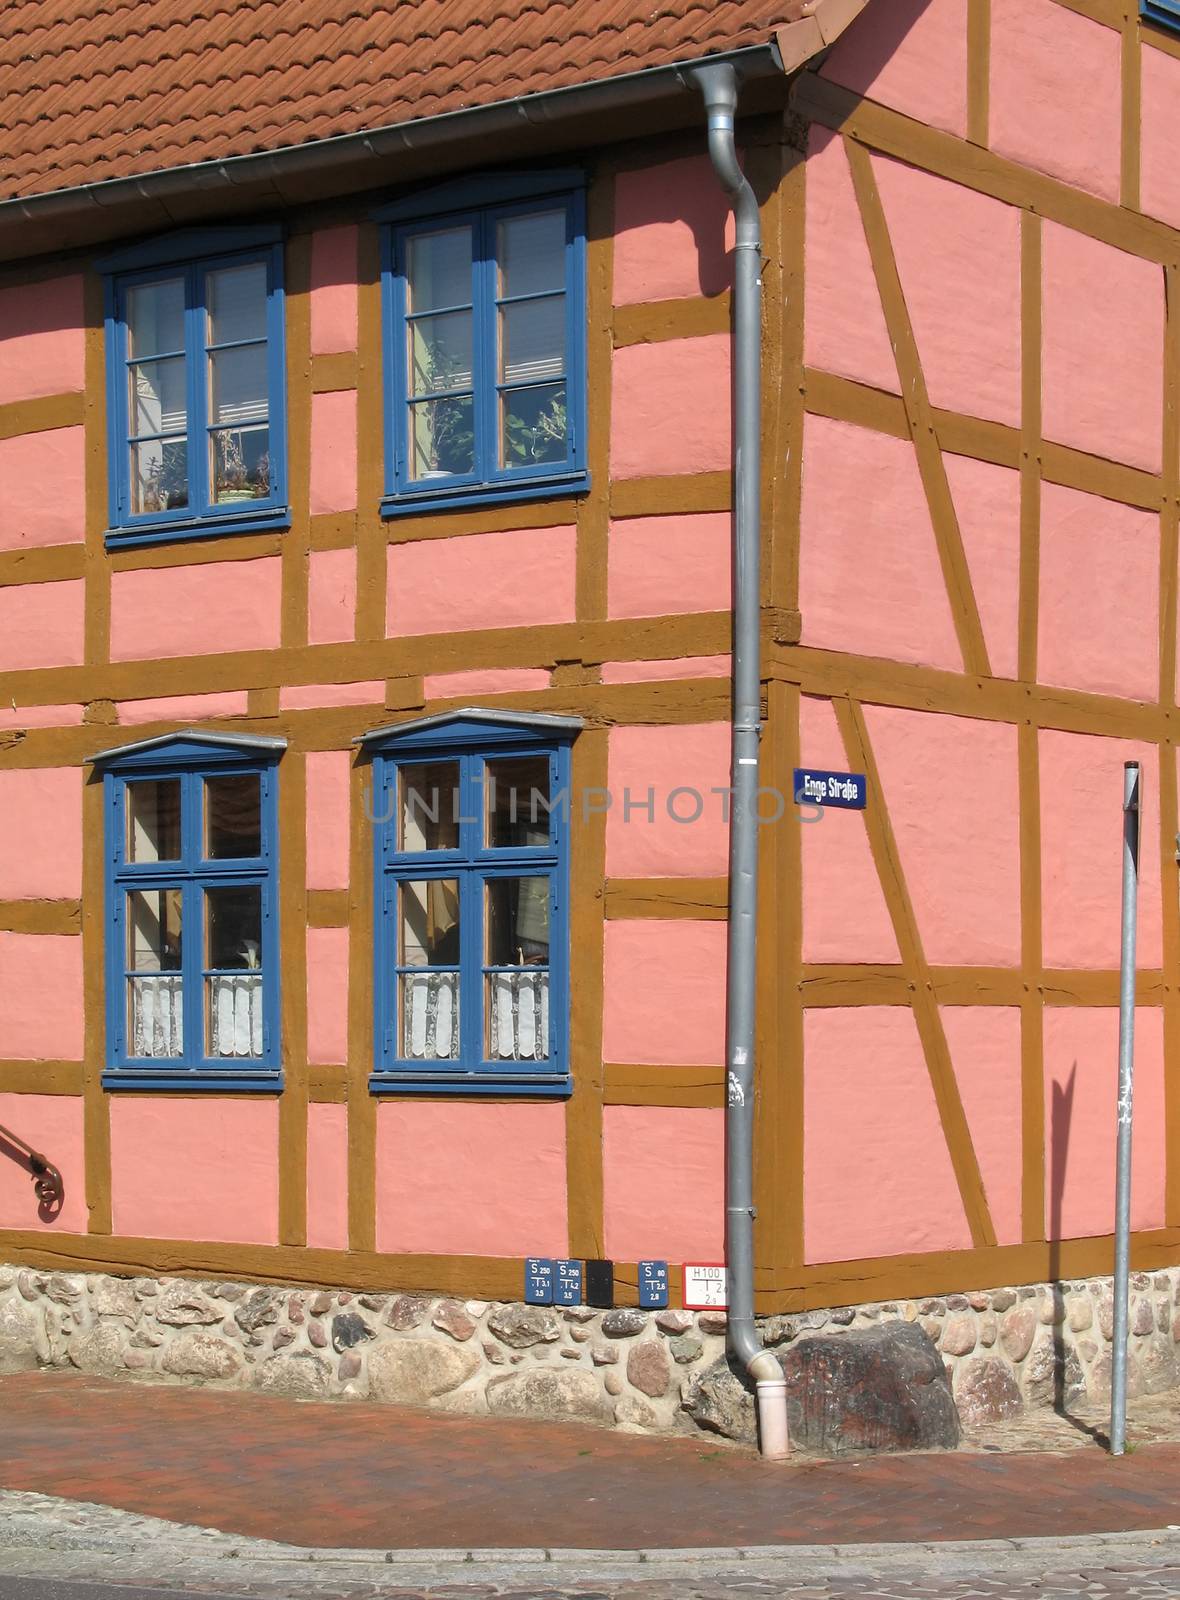 Renovated half-timbered house in Roebel, Mecklenburg-Western Pomerania, Germany.